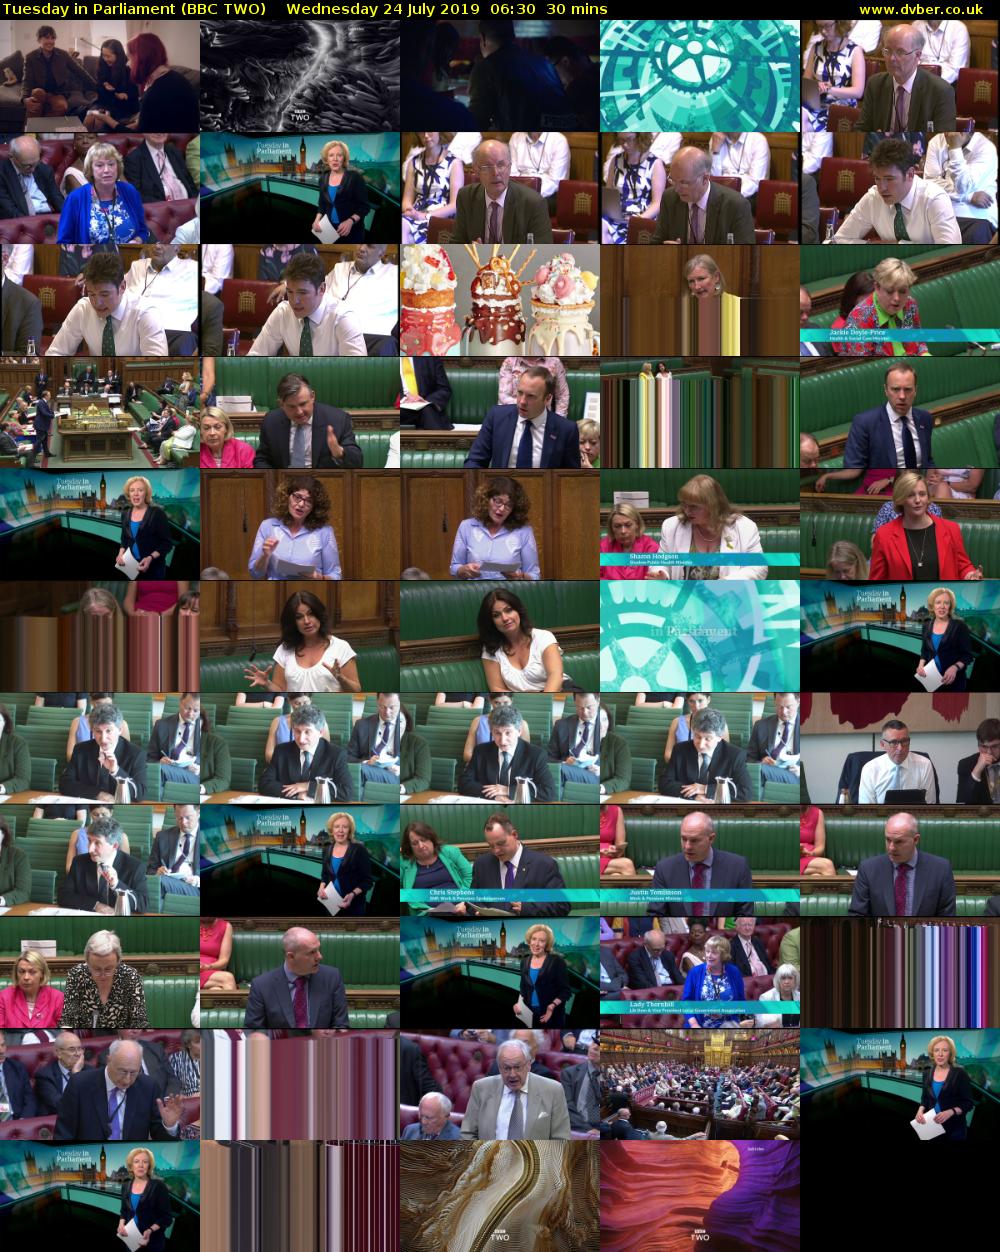 Tuesday in Parliament (BBC TWO) Wednesday 24 July 2019 06:30 - 07:00